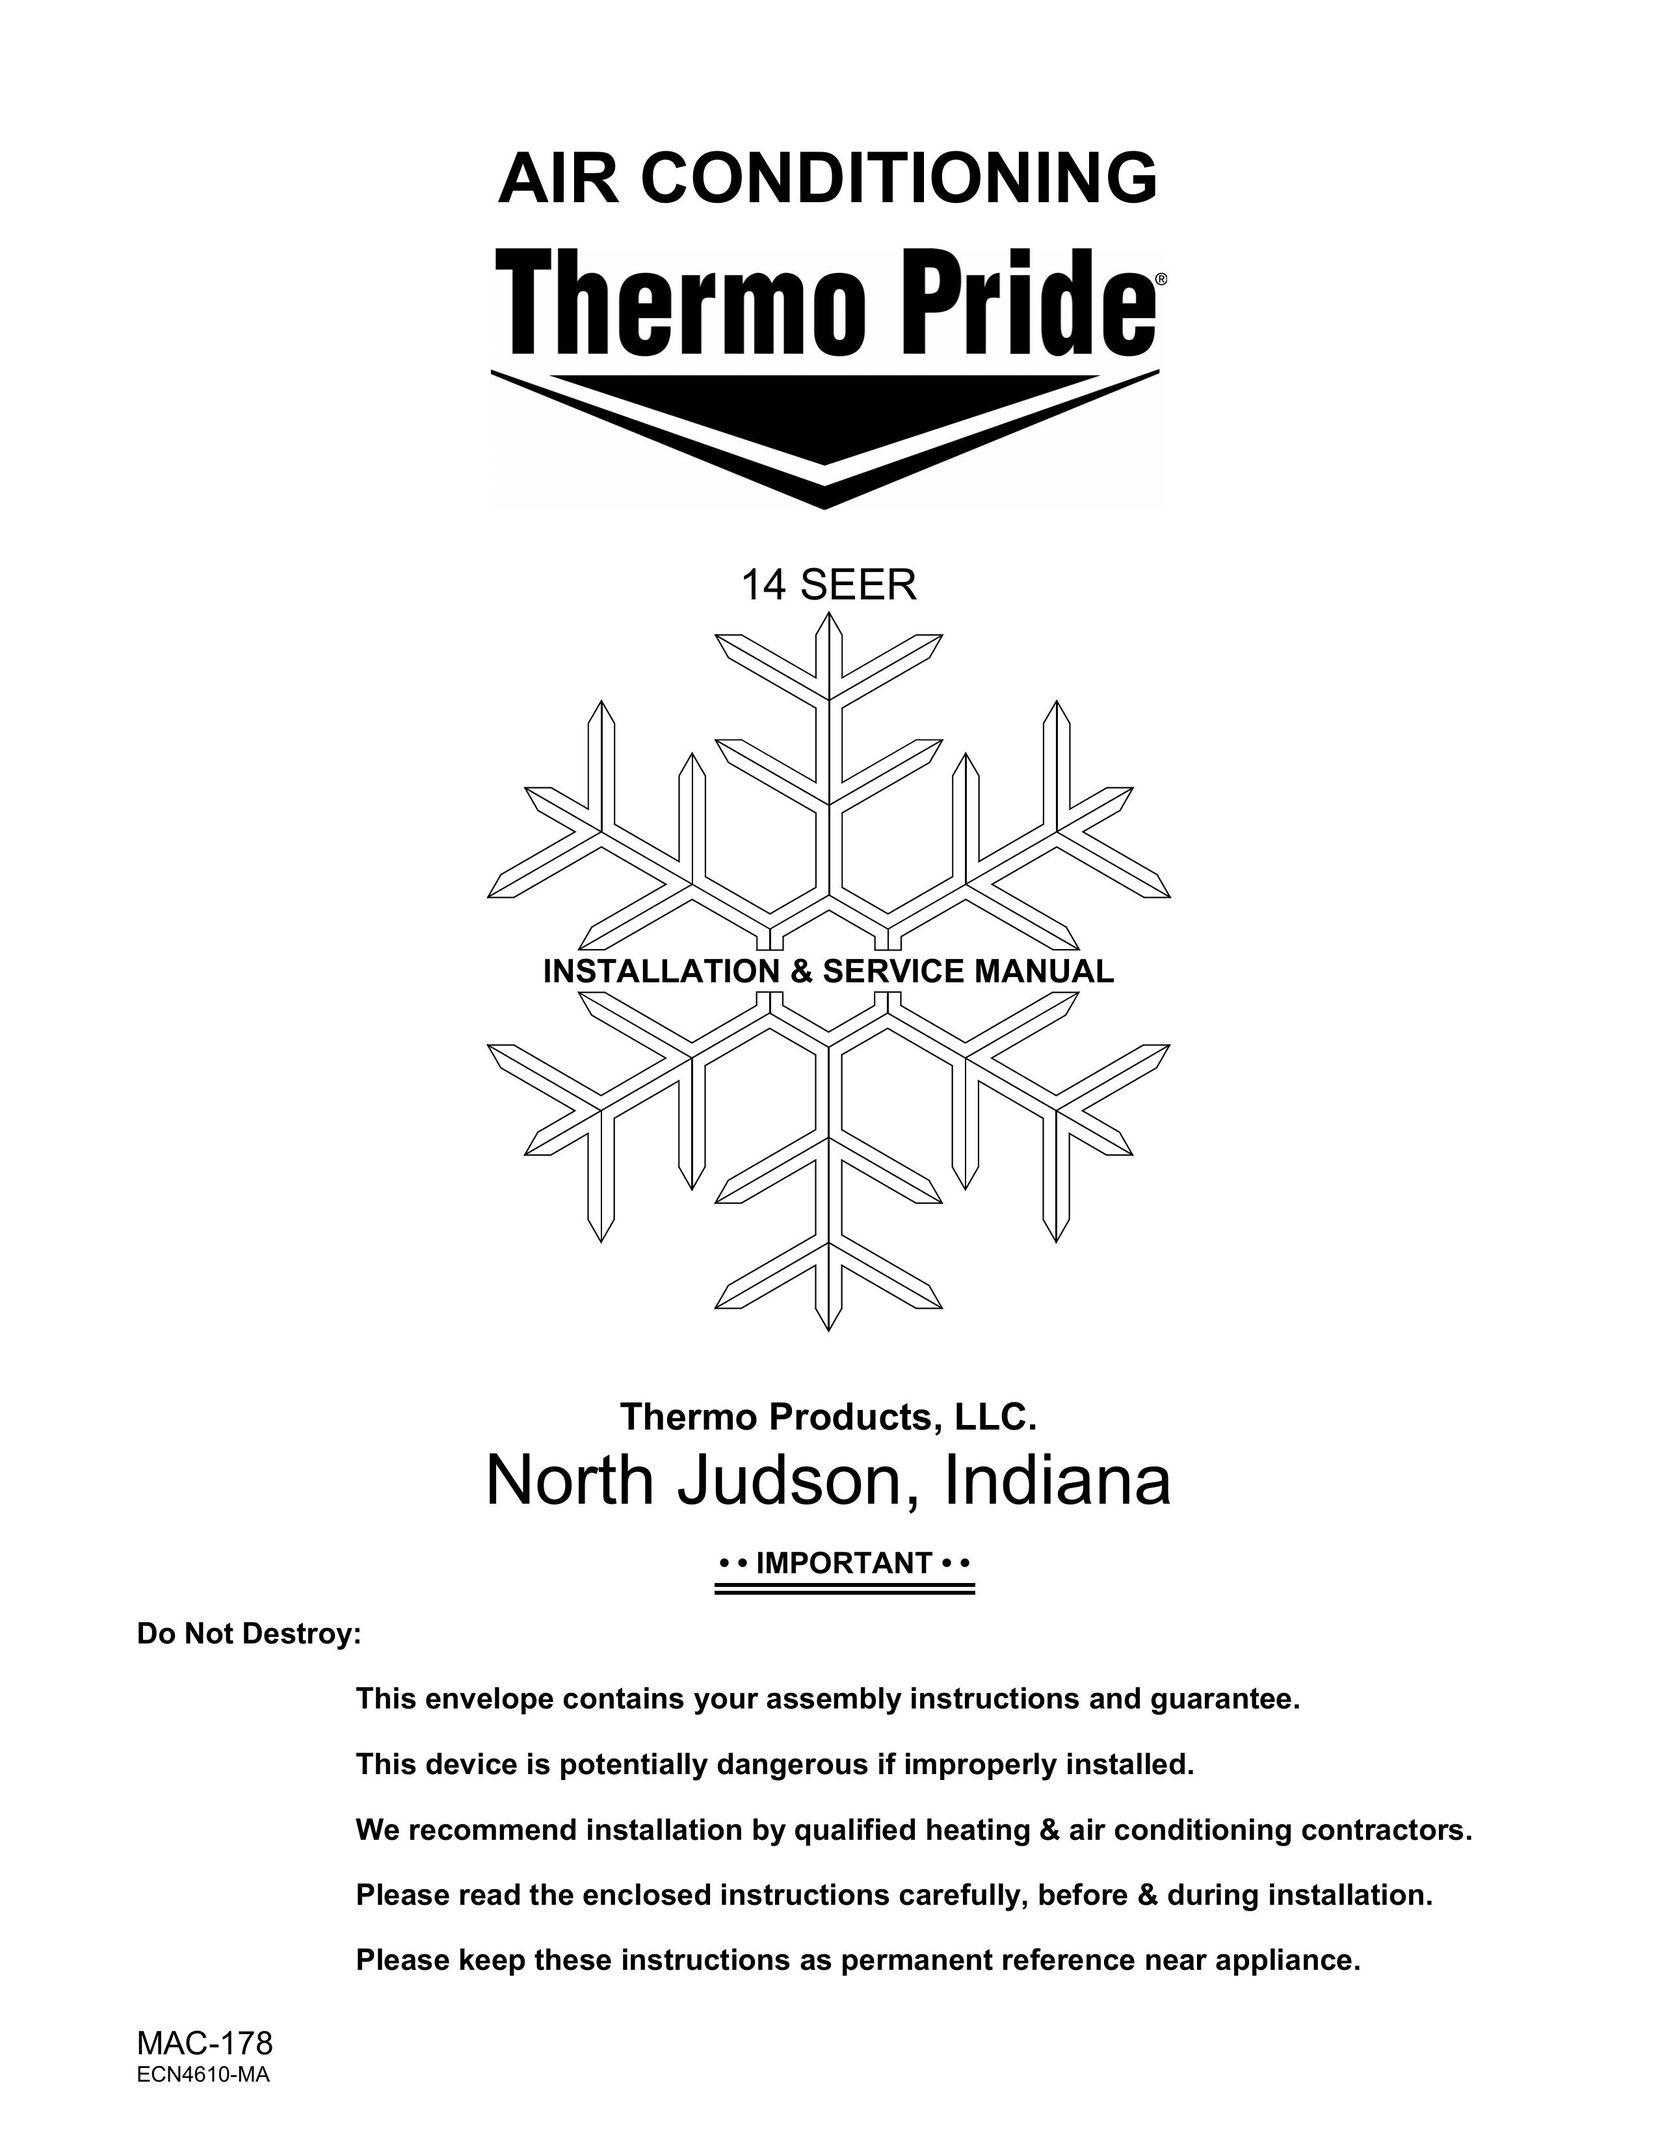 Thermo Products 14 SEER Air Conditioner User Manual